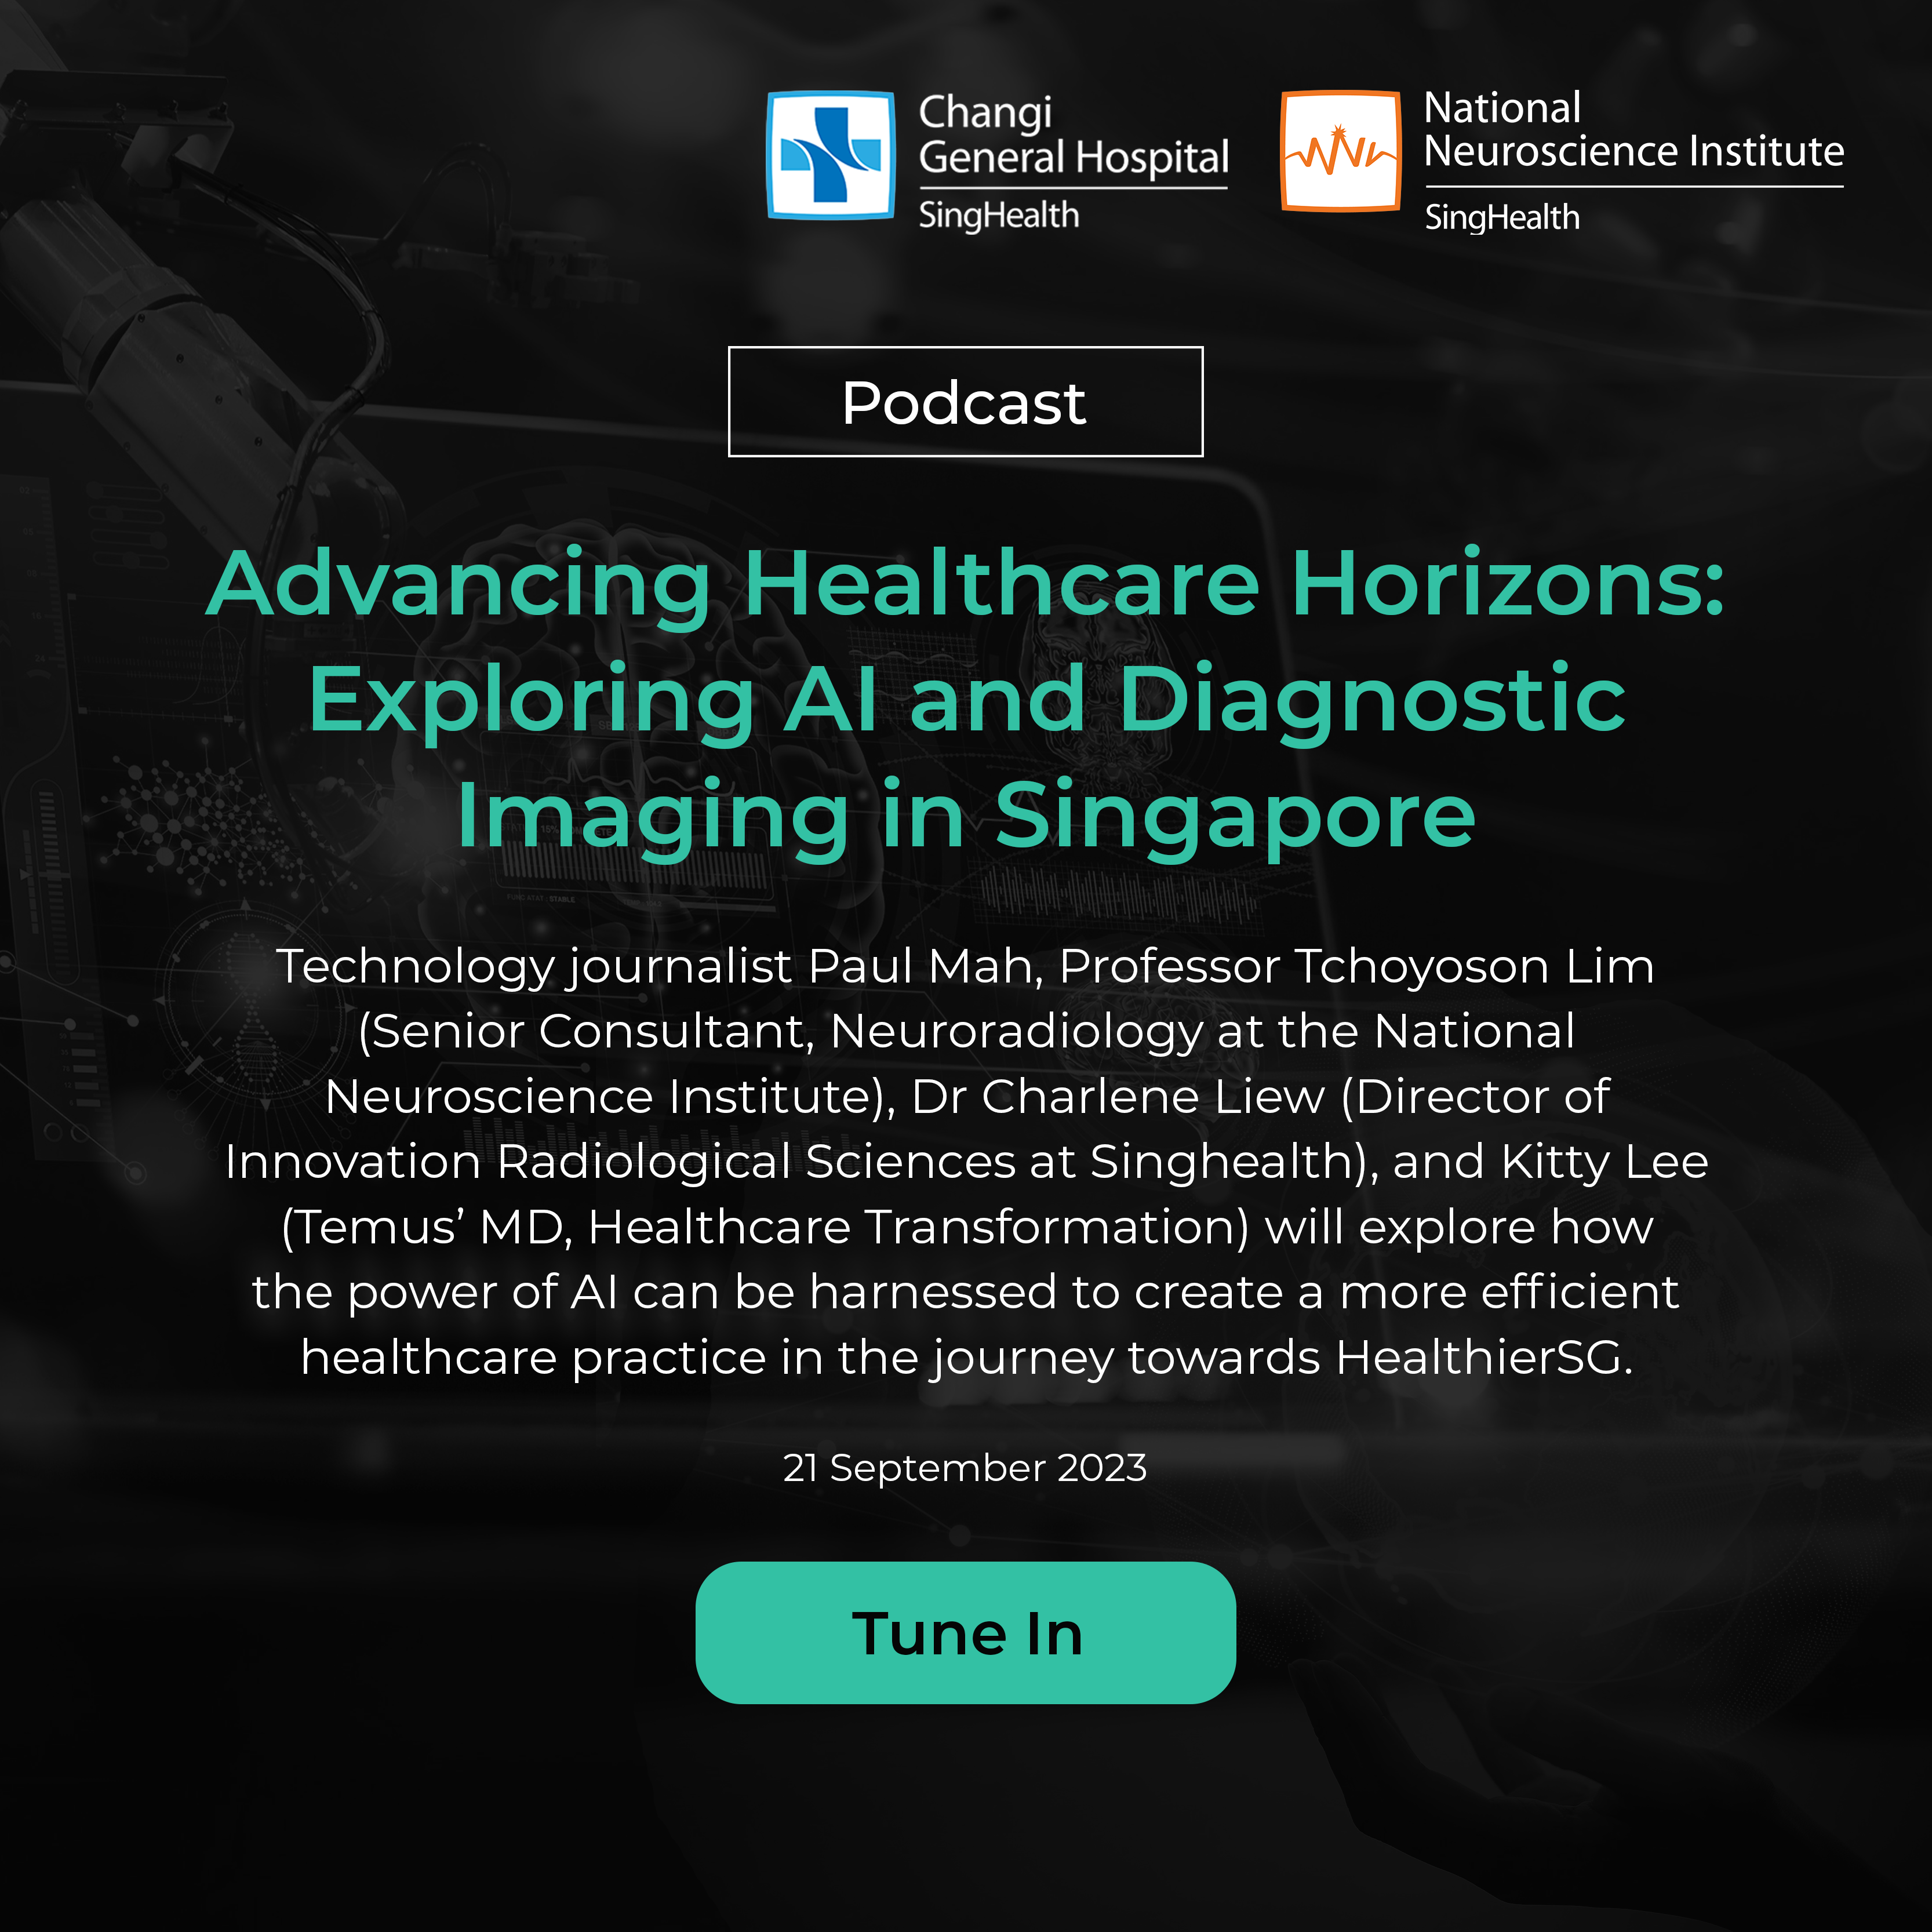 [Podcast] Advancing Healthcare Horizons: Exploring AI and Diagnostic Imaging in Singapore